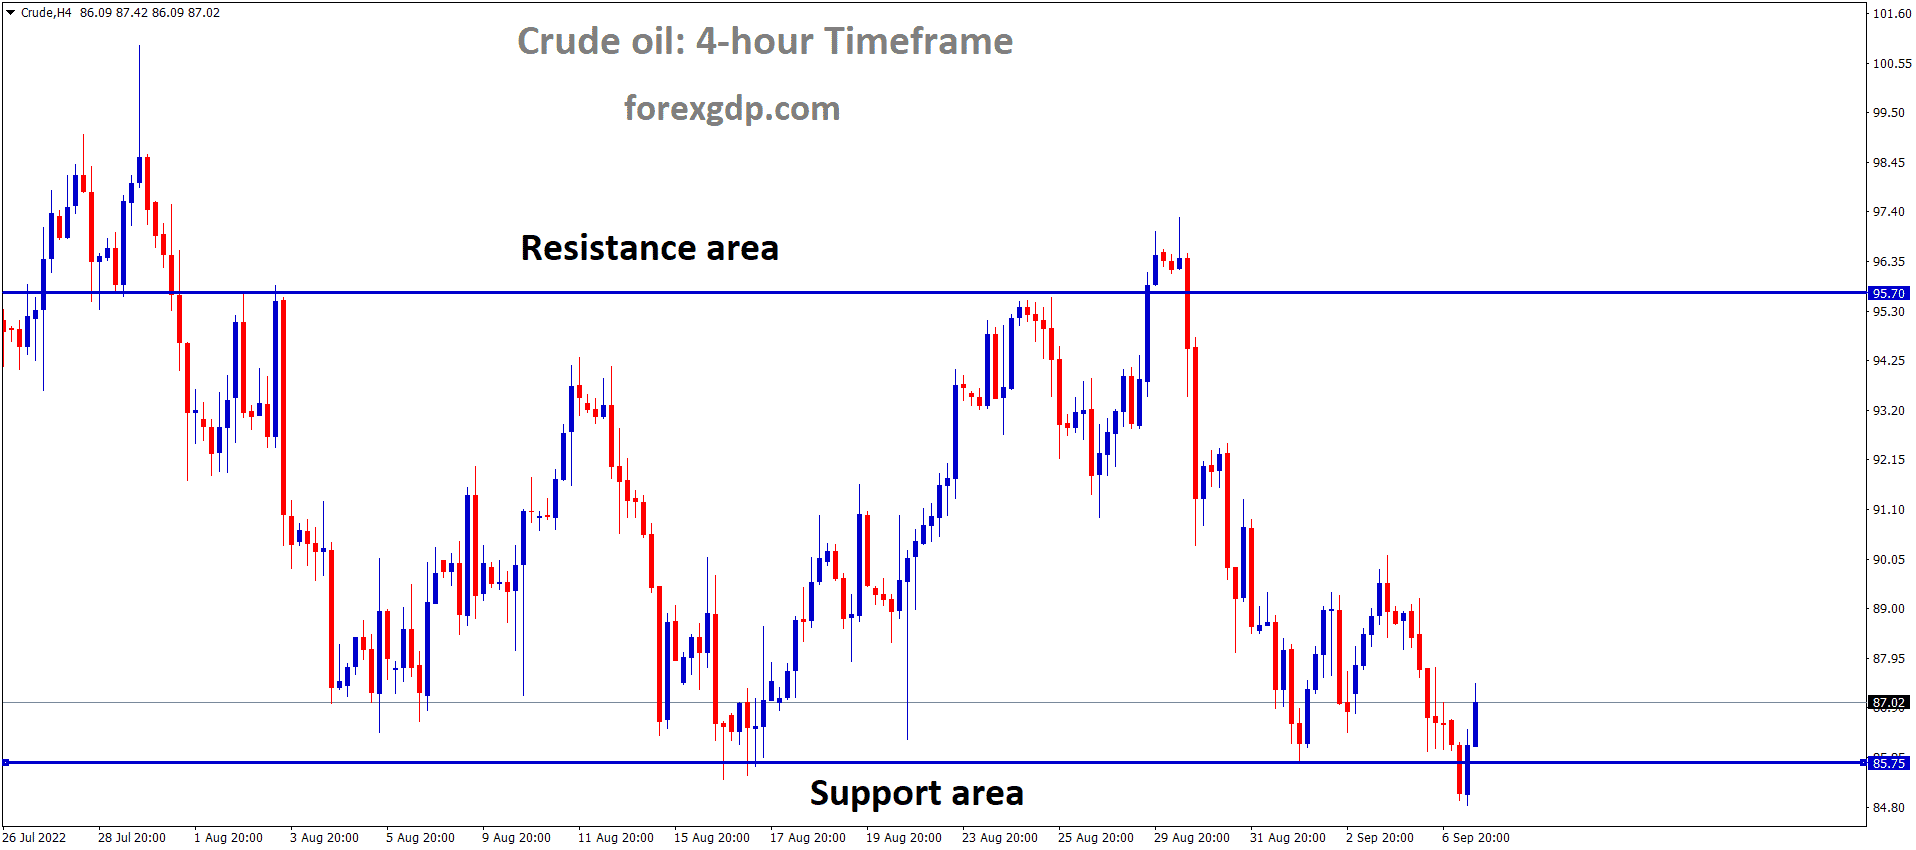 Crude Oil is moving in the Box pattern and the market has rebounded from the horizontal support area of the pattern 1